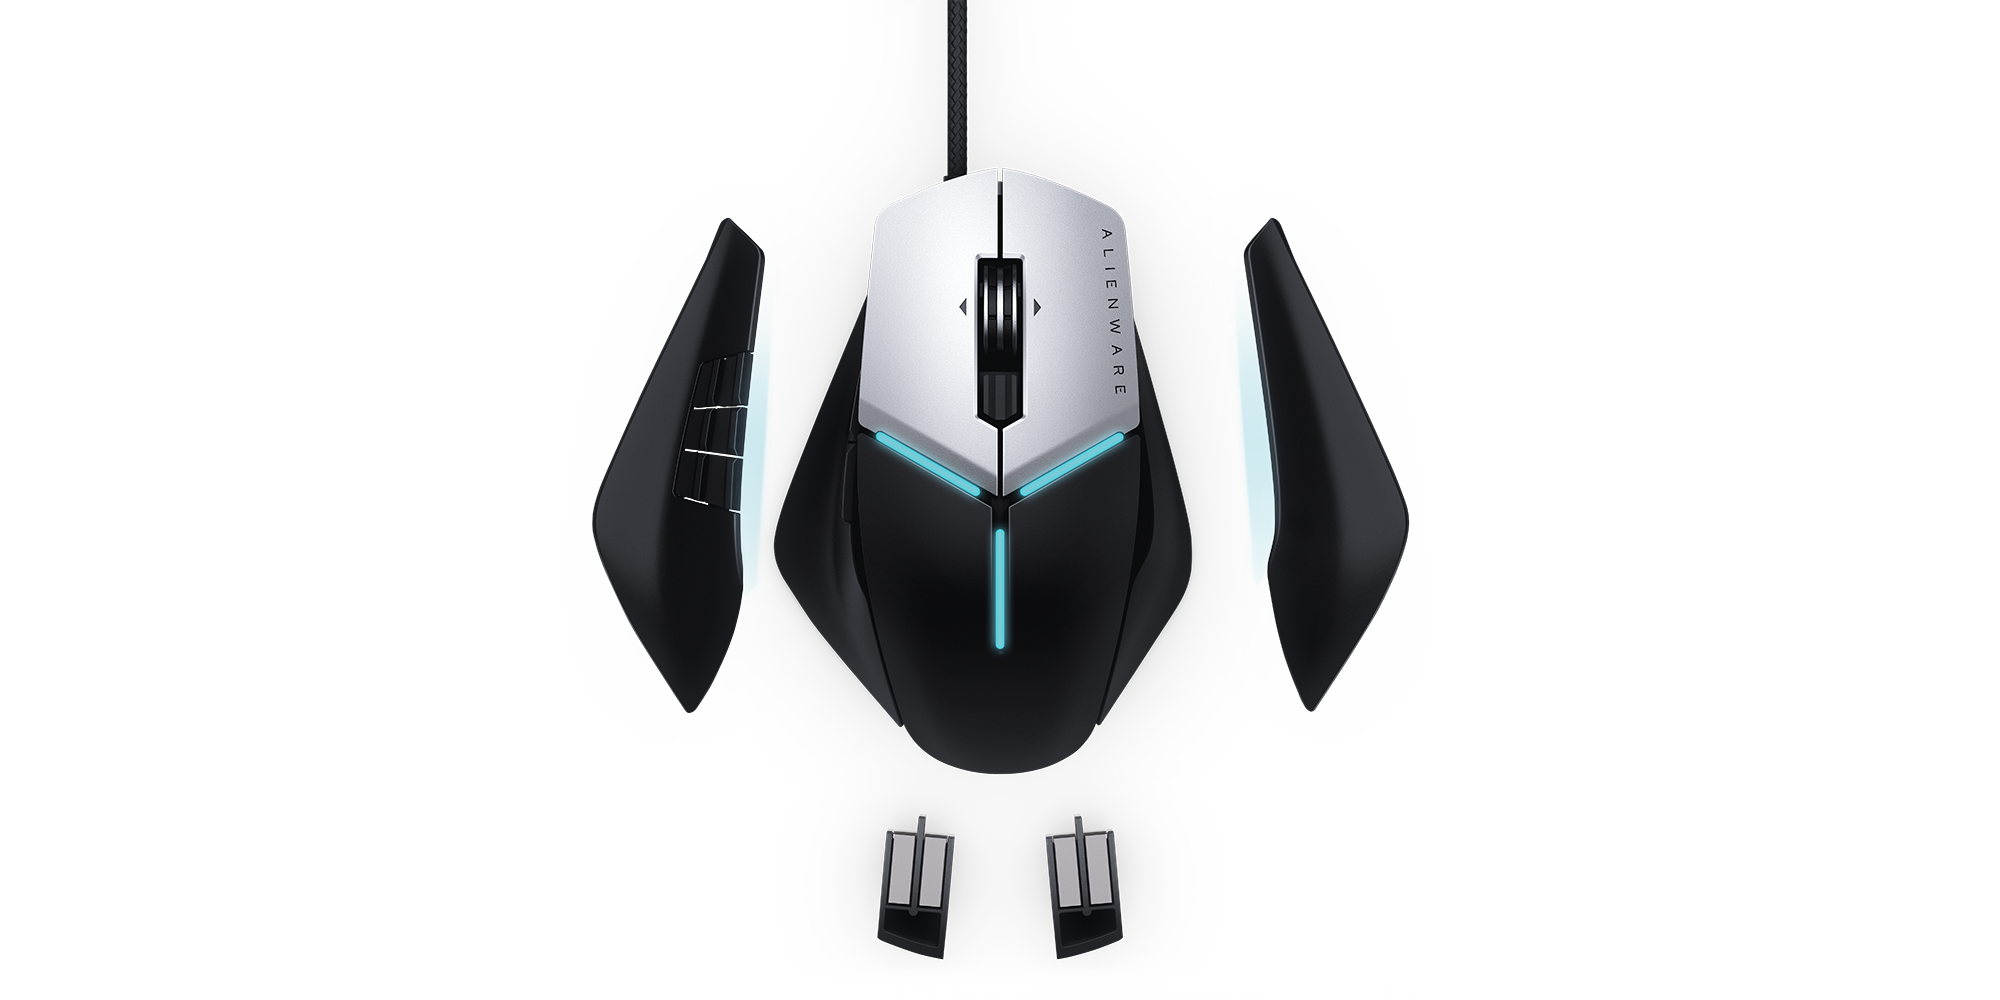 E3 2017: Alienware Advanced Gaming Mouse (AW558) and Alienware Elite Gaming Mouse (AW958) Announced